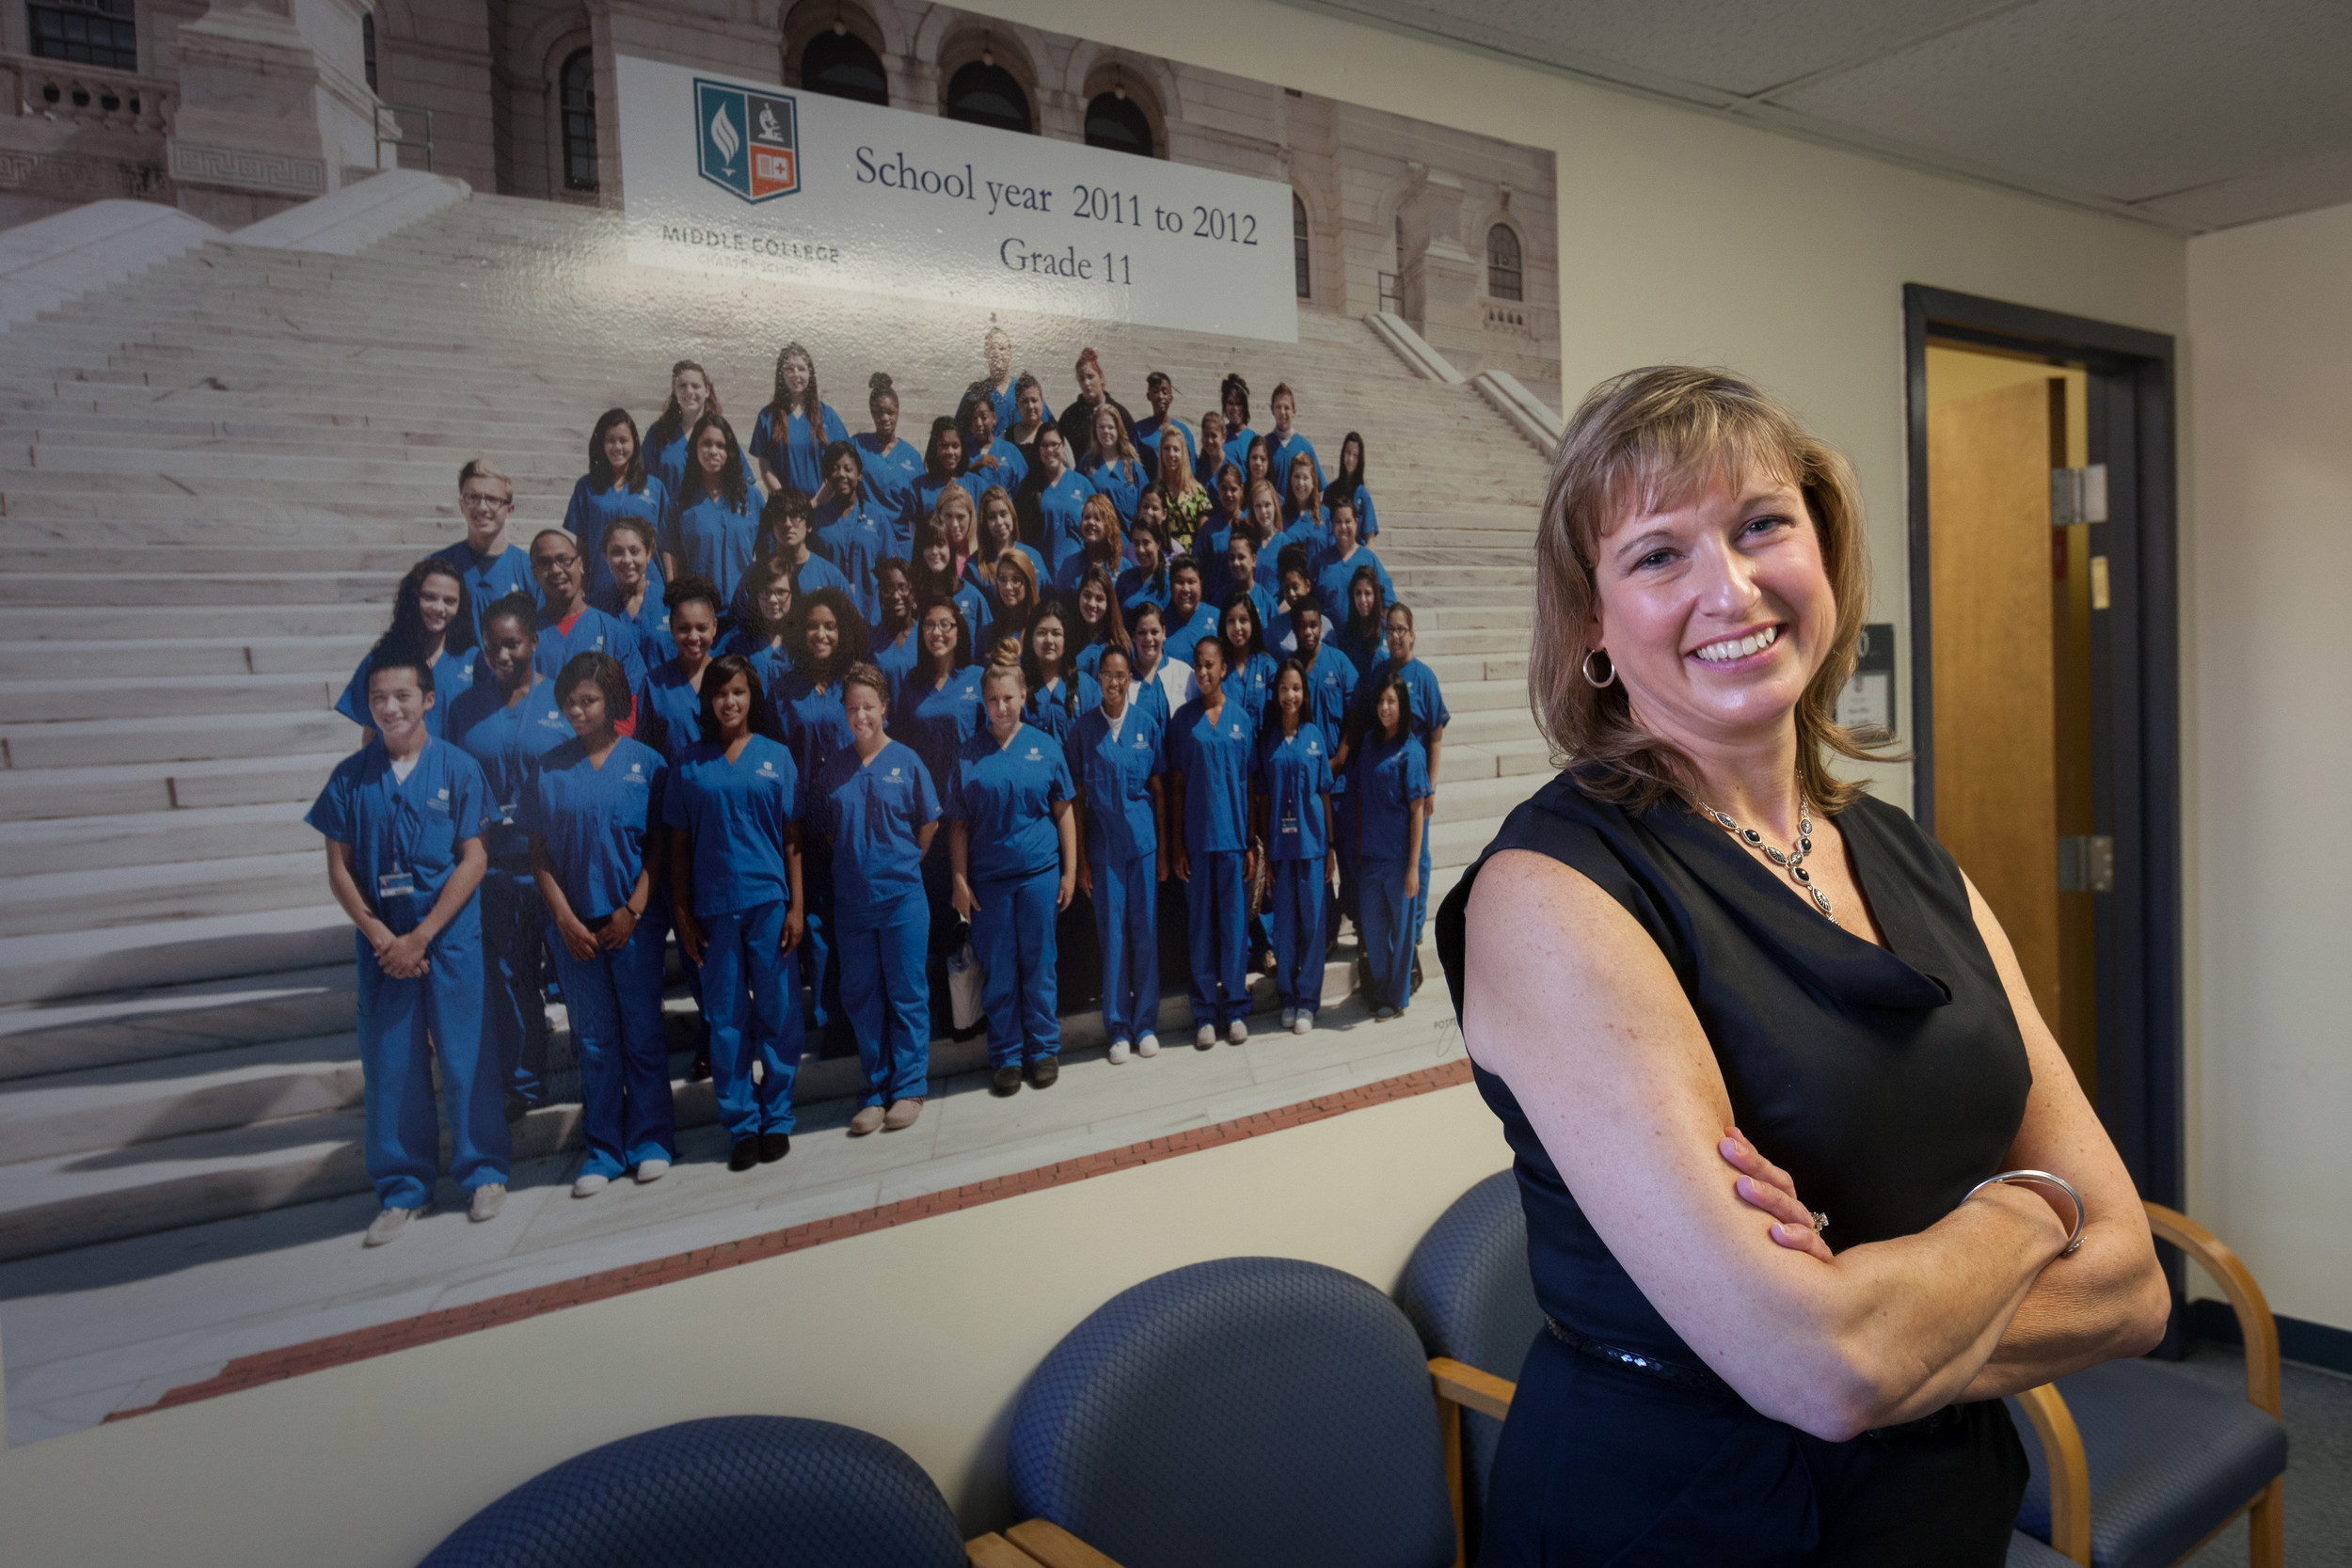 Pamela McCue, CEO of the R.I. Nurses Institute Middle College Charter School, in front of a poster of the first entering class of students from 2011.